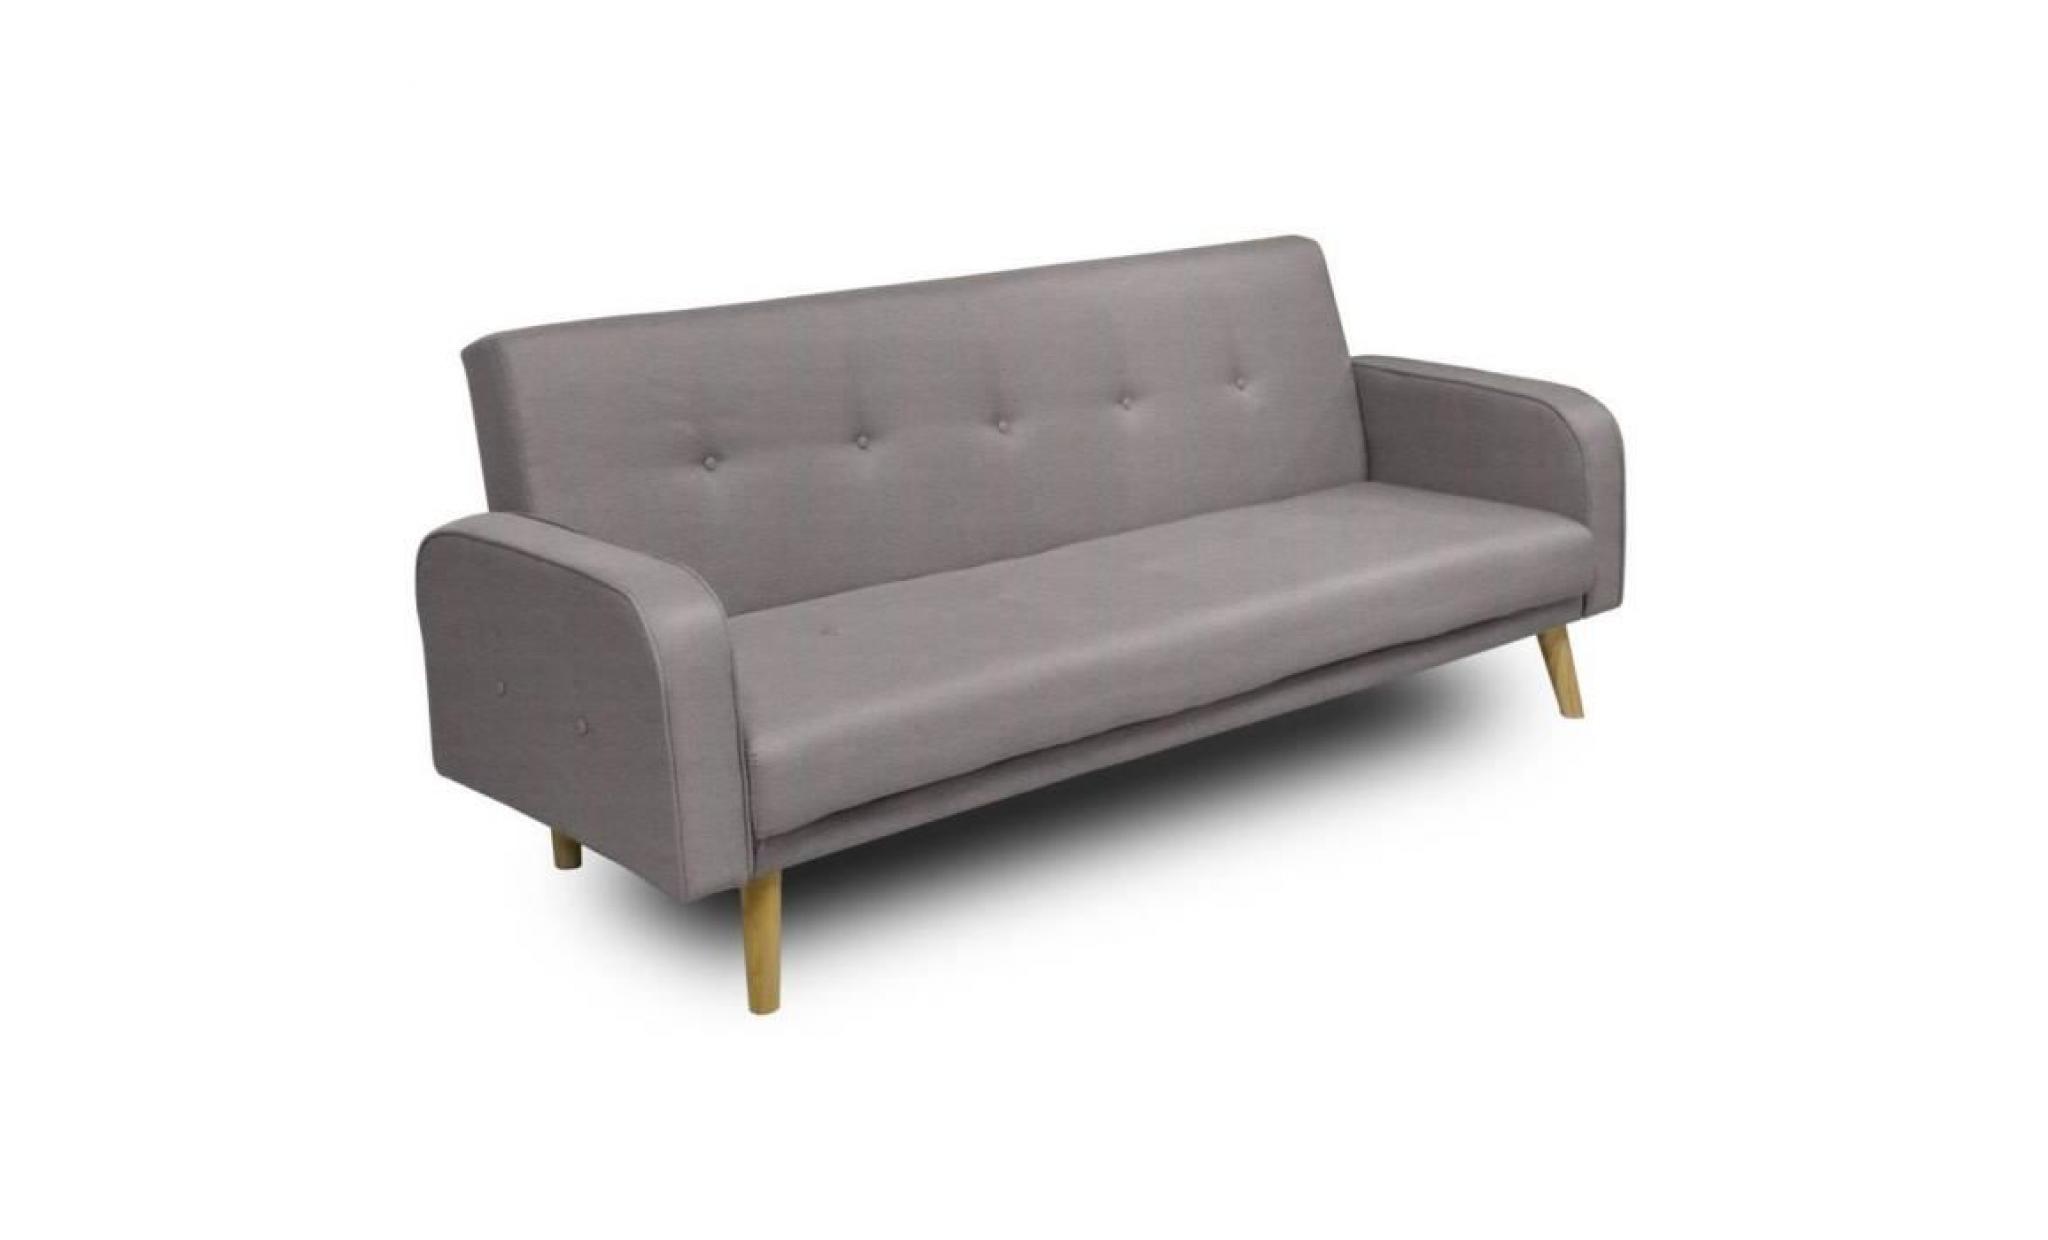 canapé clic clac goteborg gris taupe convertible style scandinave couchage 113*180cm